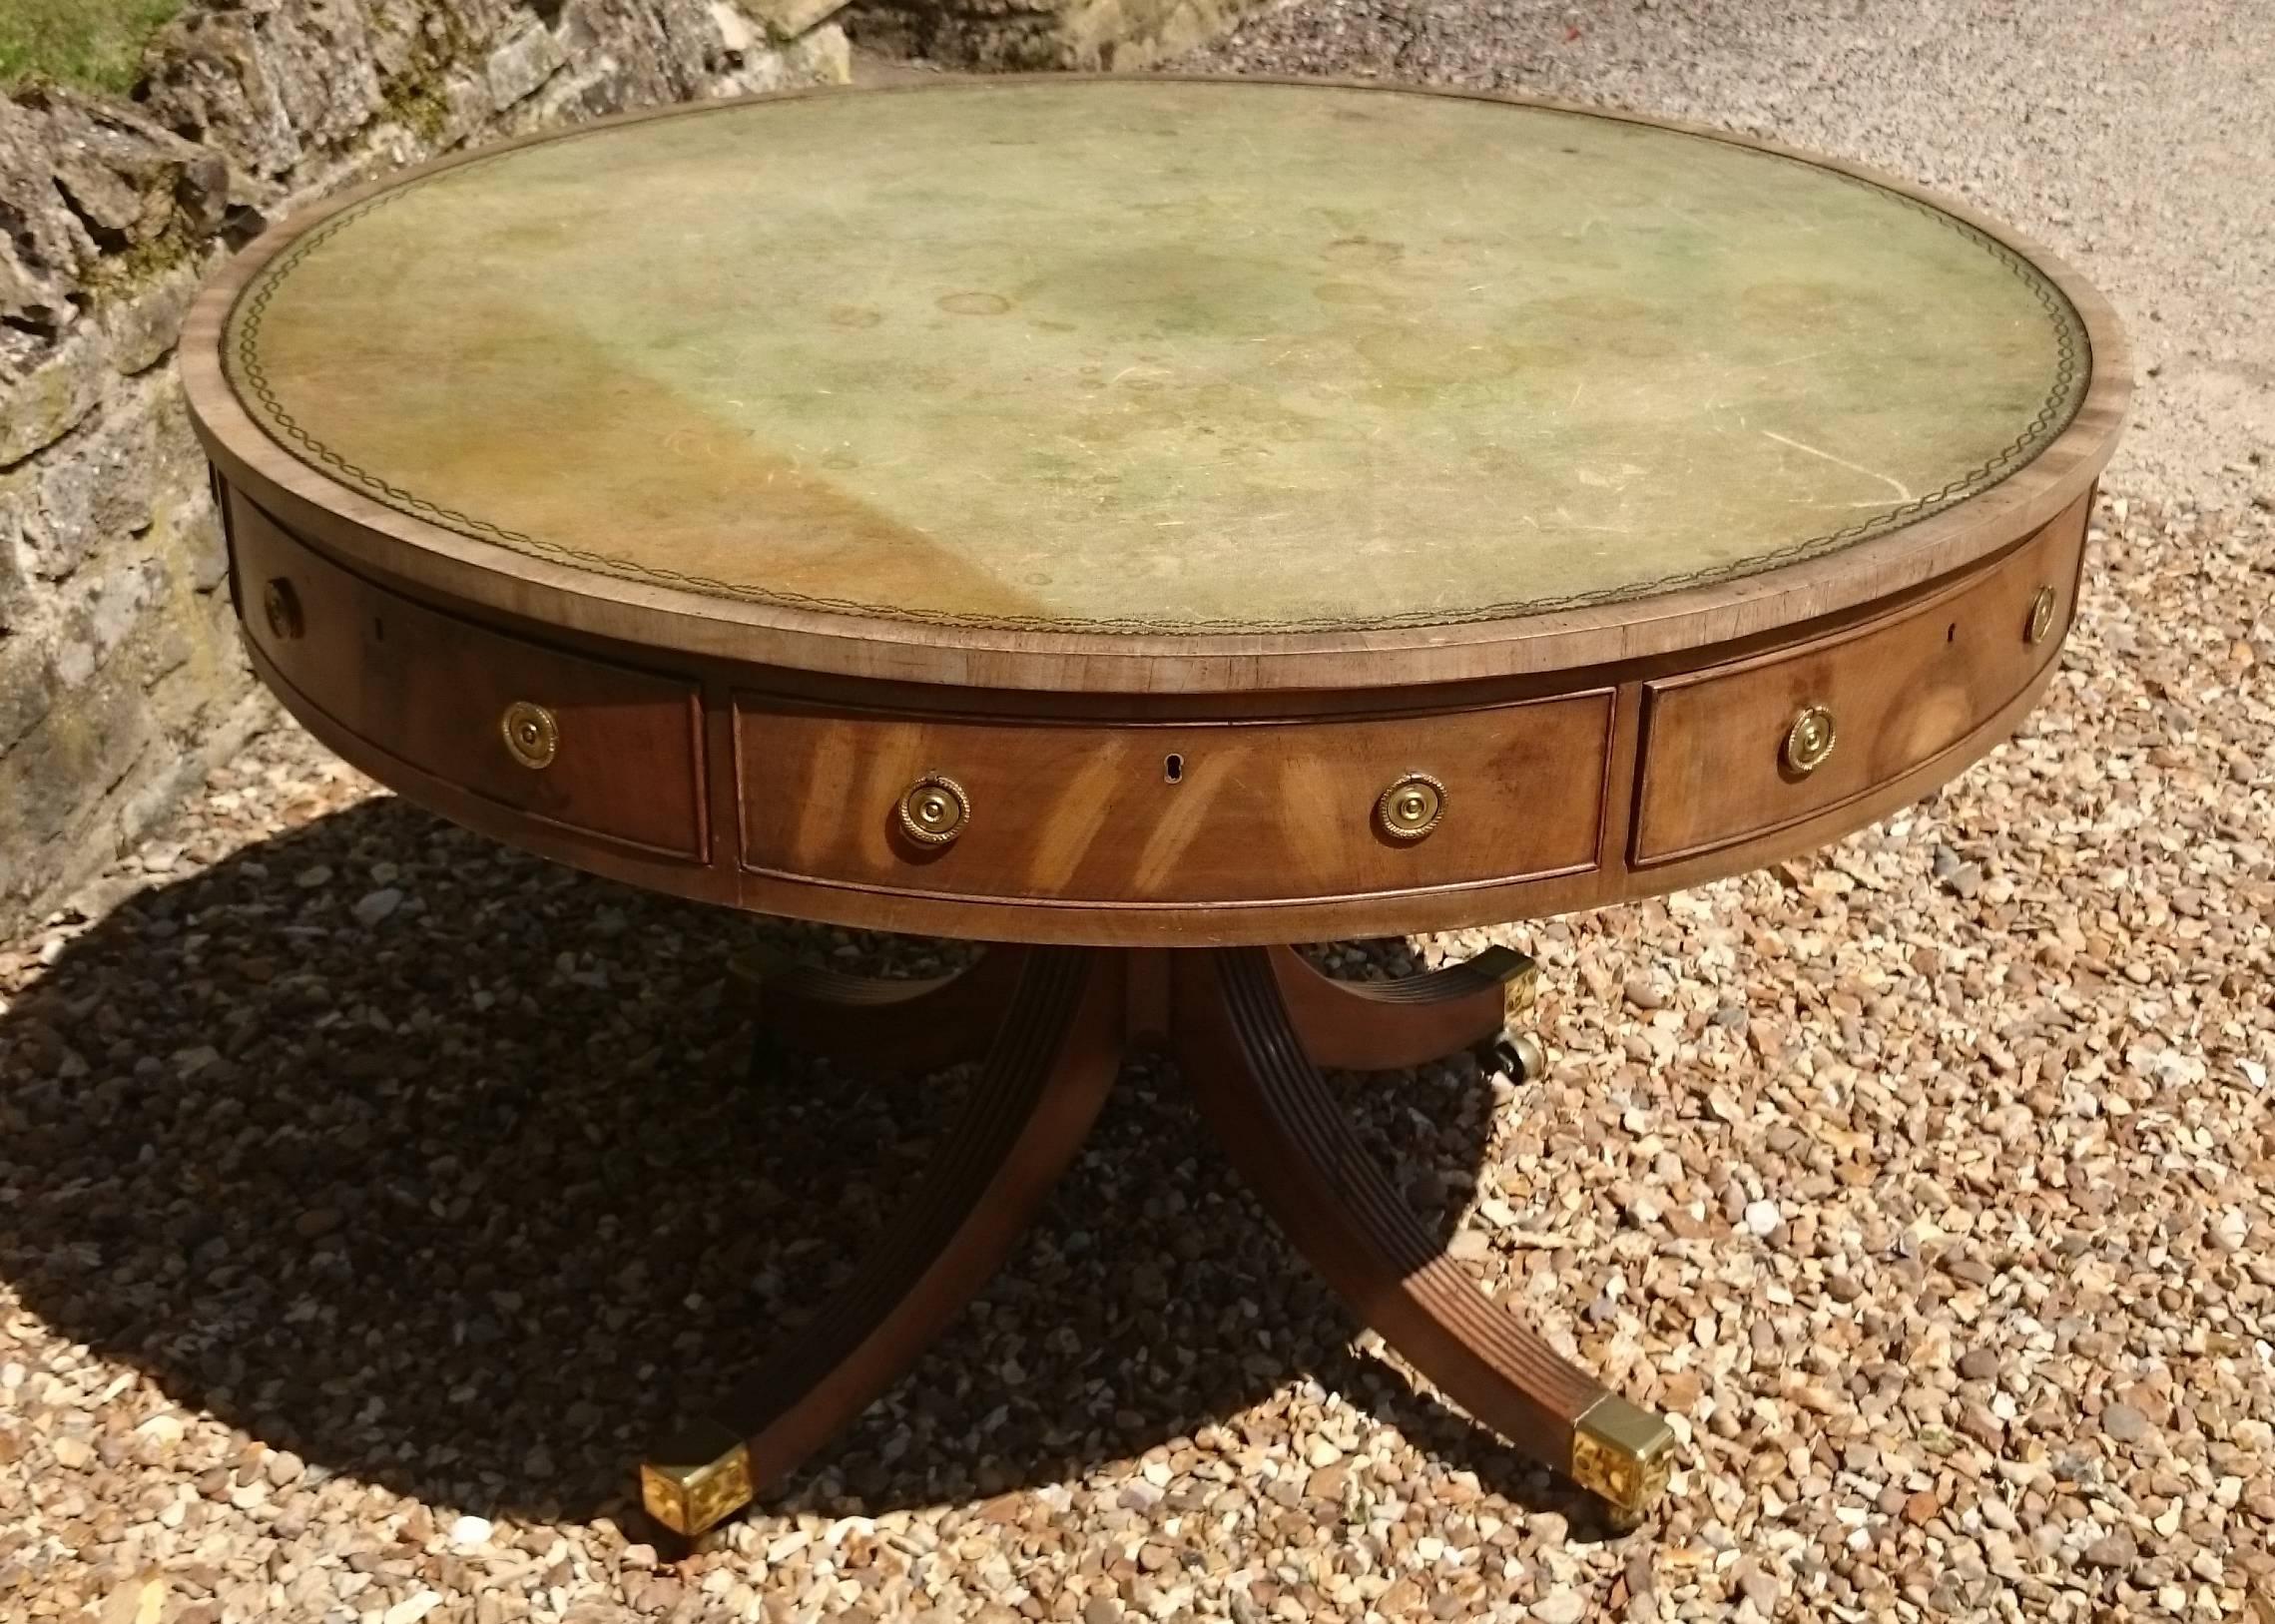 This is a very fine quality 18th century antique library 'drum' table. This library table has a rotating top which means lots of work spread over the writing surface can be accessed by simply spinning the top. This particular table has five drawers,